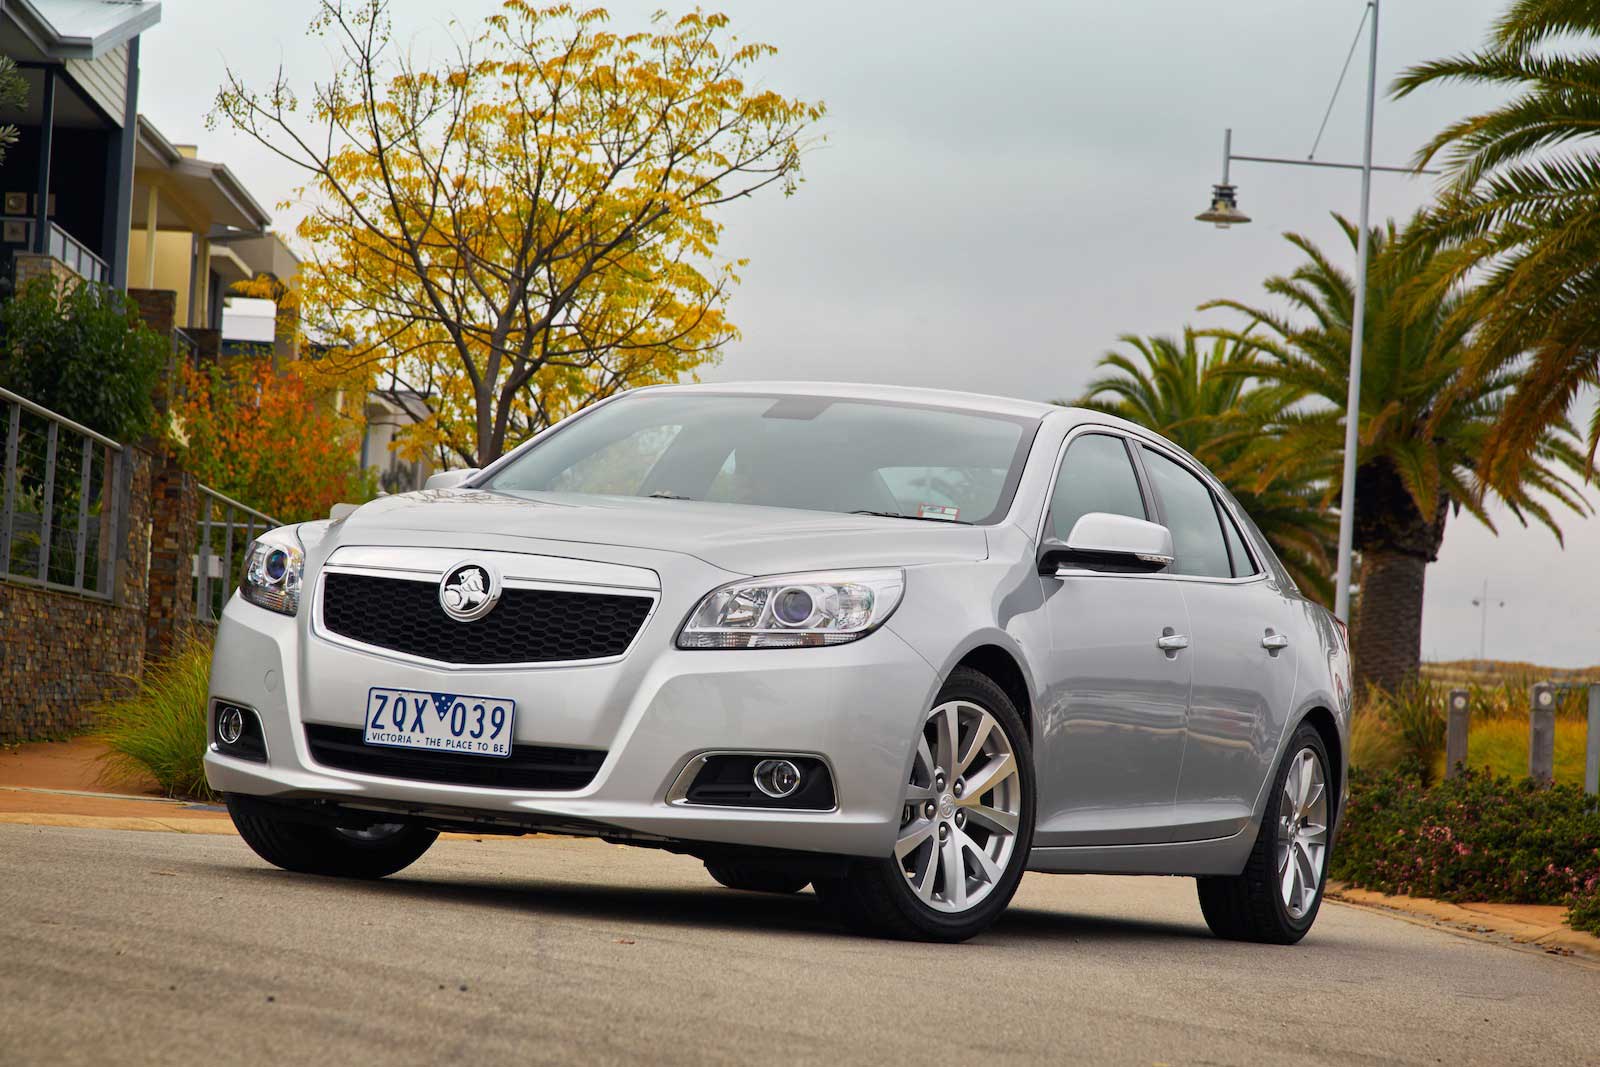 Holden Malibu CDX 2.4L Exterior front view